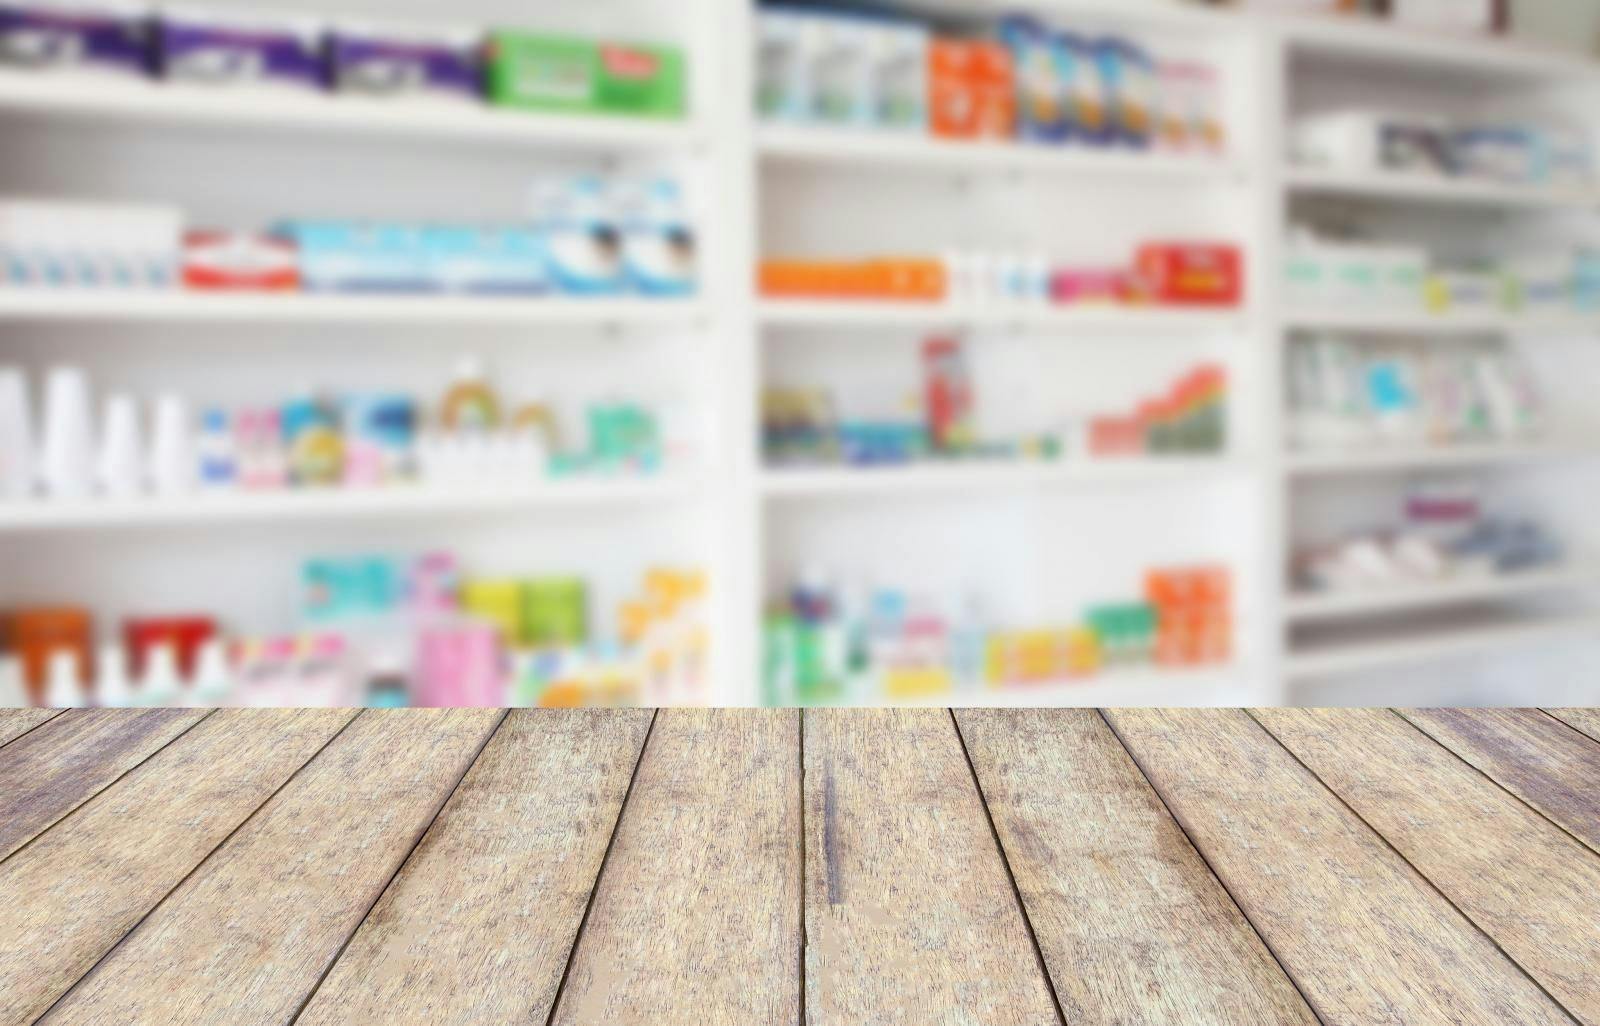 CDC Issues Updated Guidance for Pharmacies During the COVID-19 Pandemic